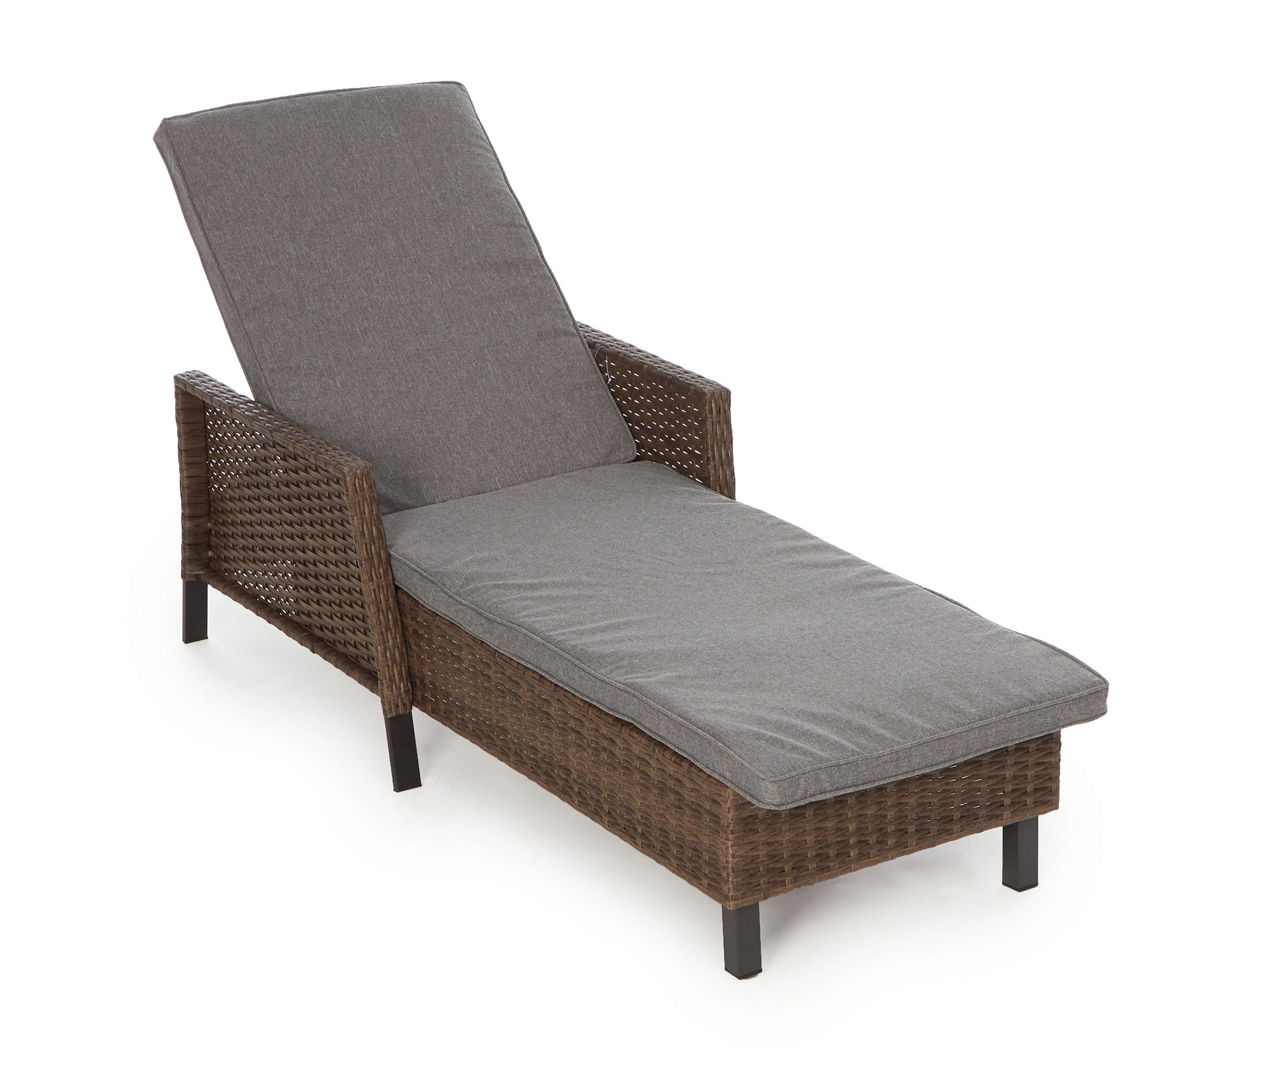 Yorktown Gray All-Weather Wicker Cushioned Patio Chaise Lounge